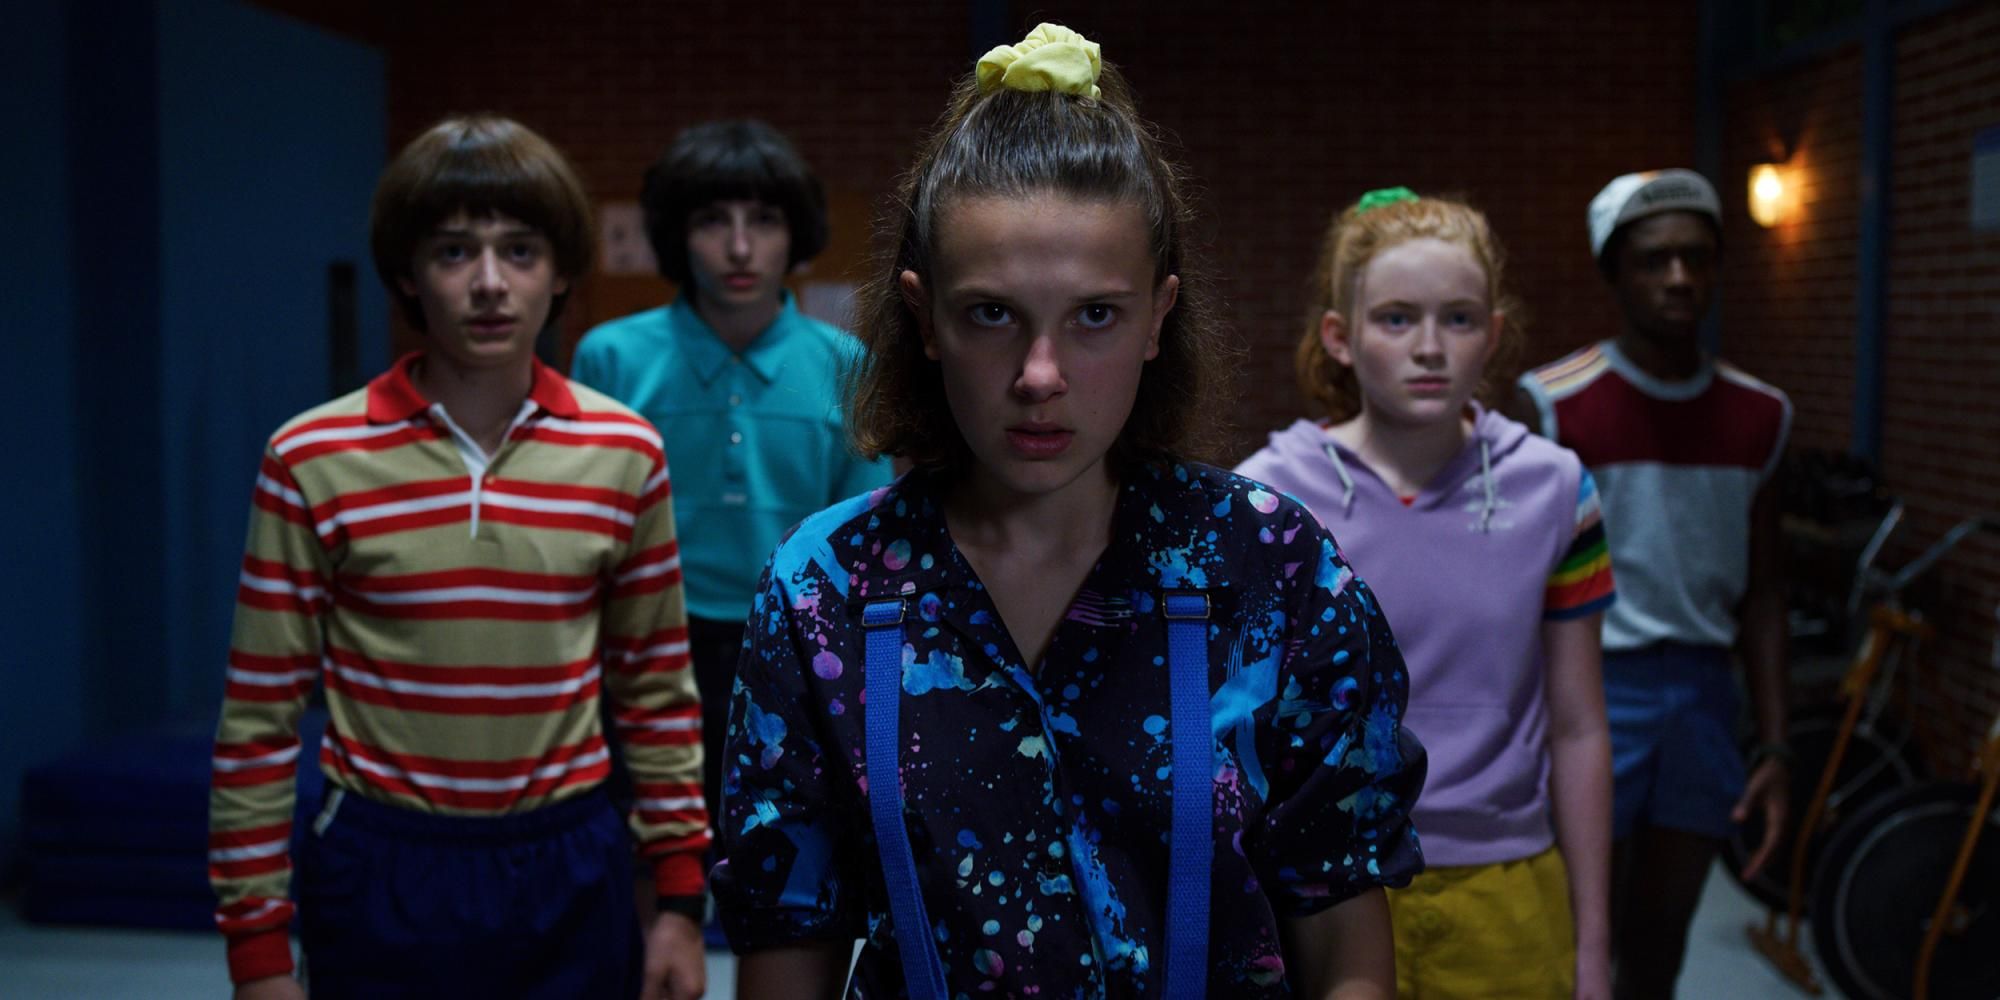 Stranger Things 5' Not Adding New Characters, Focus on Originals